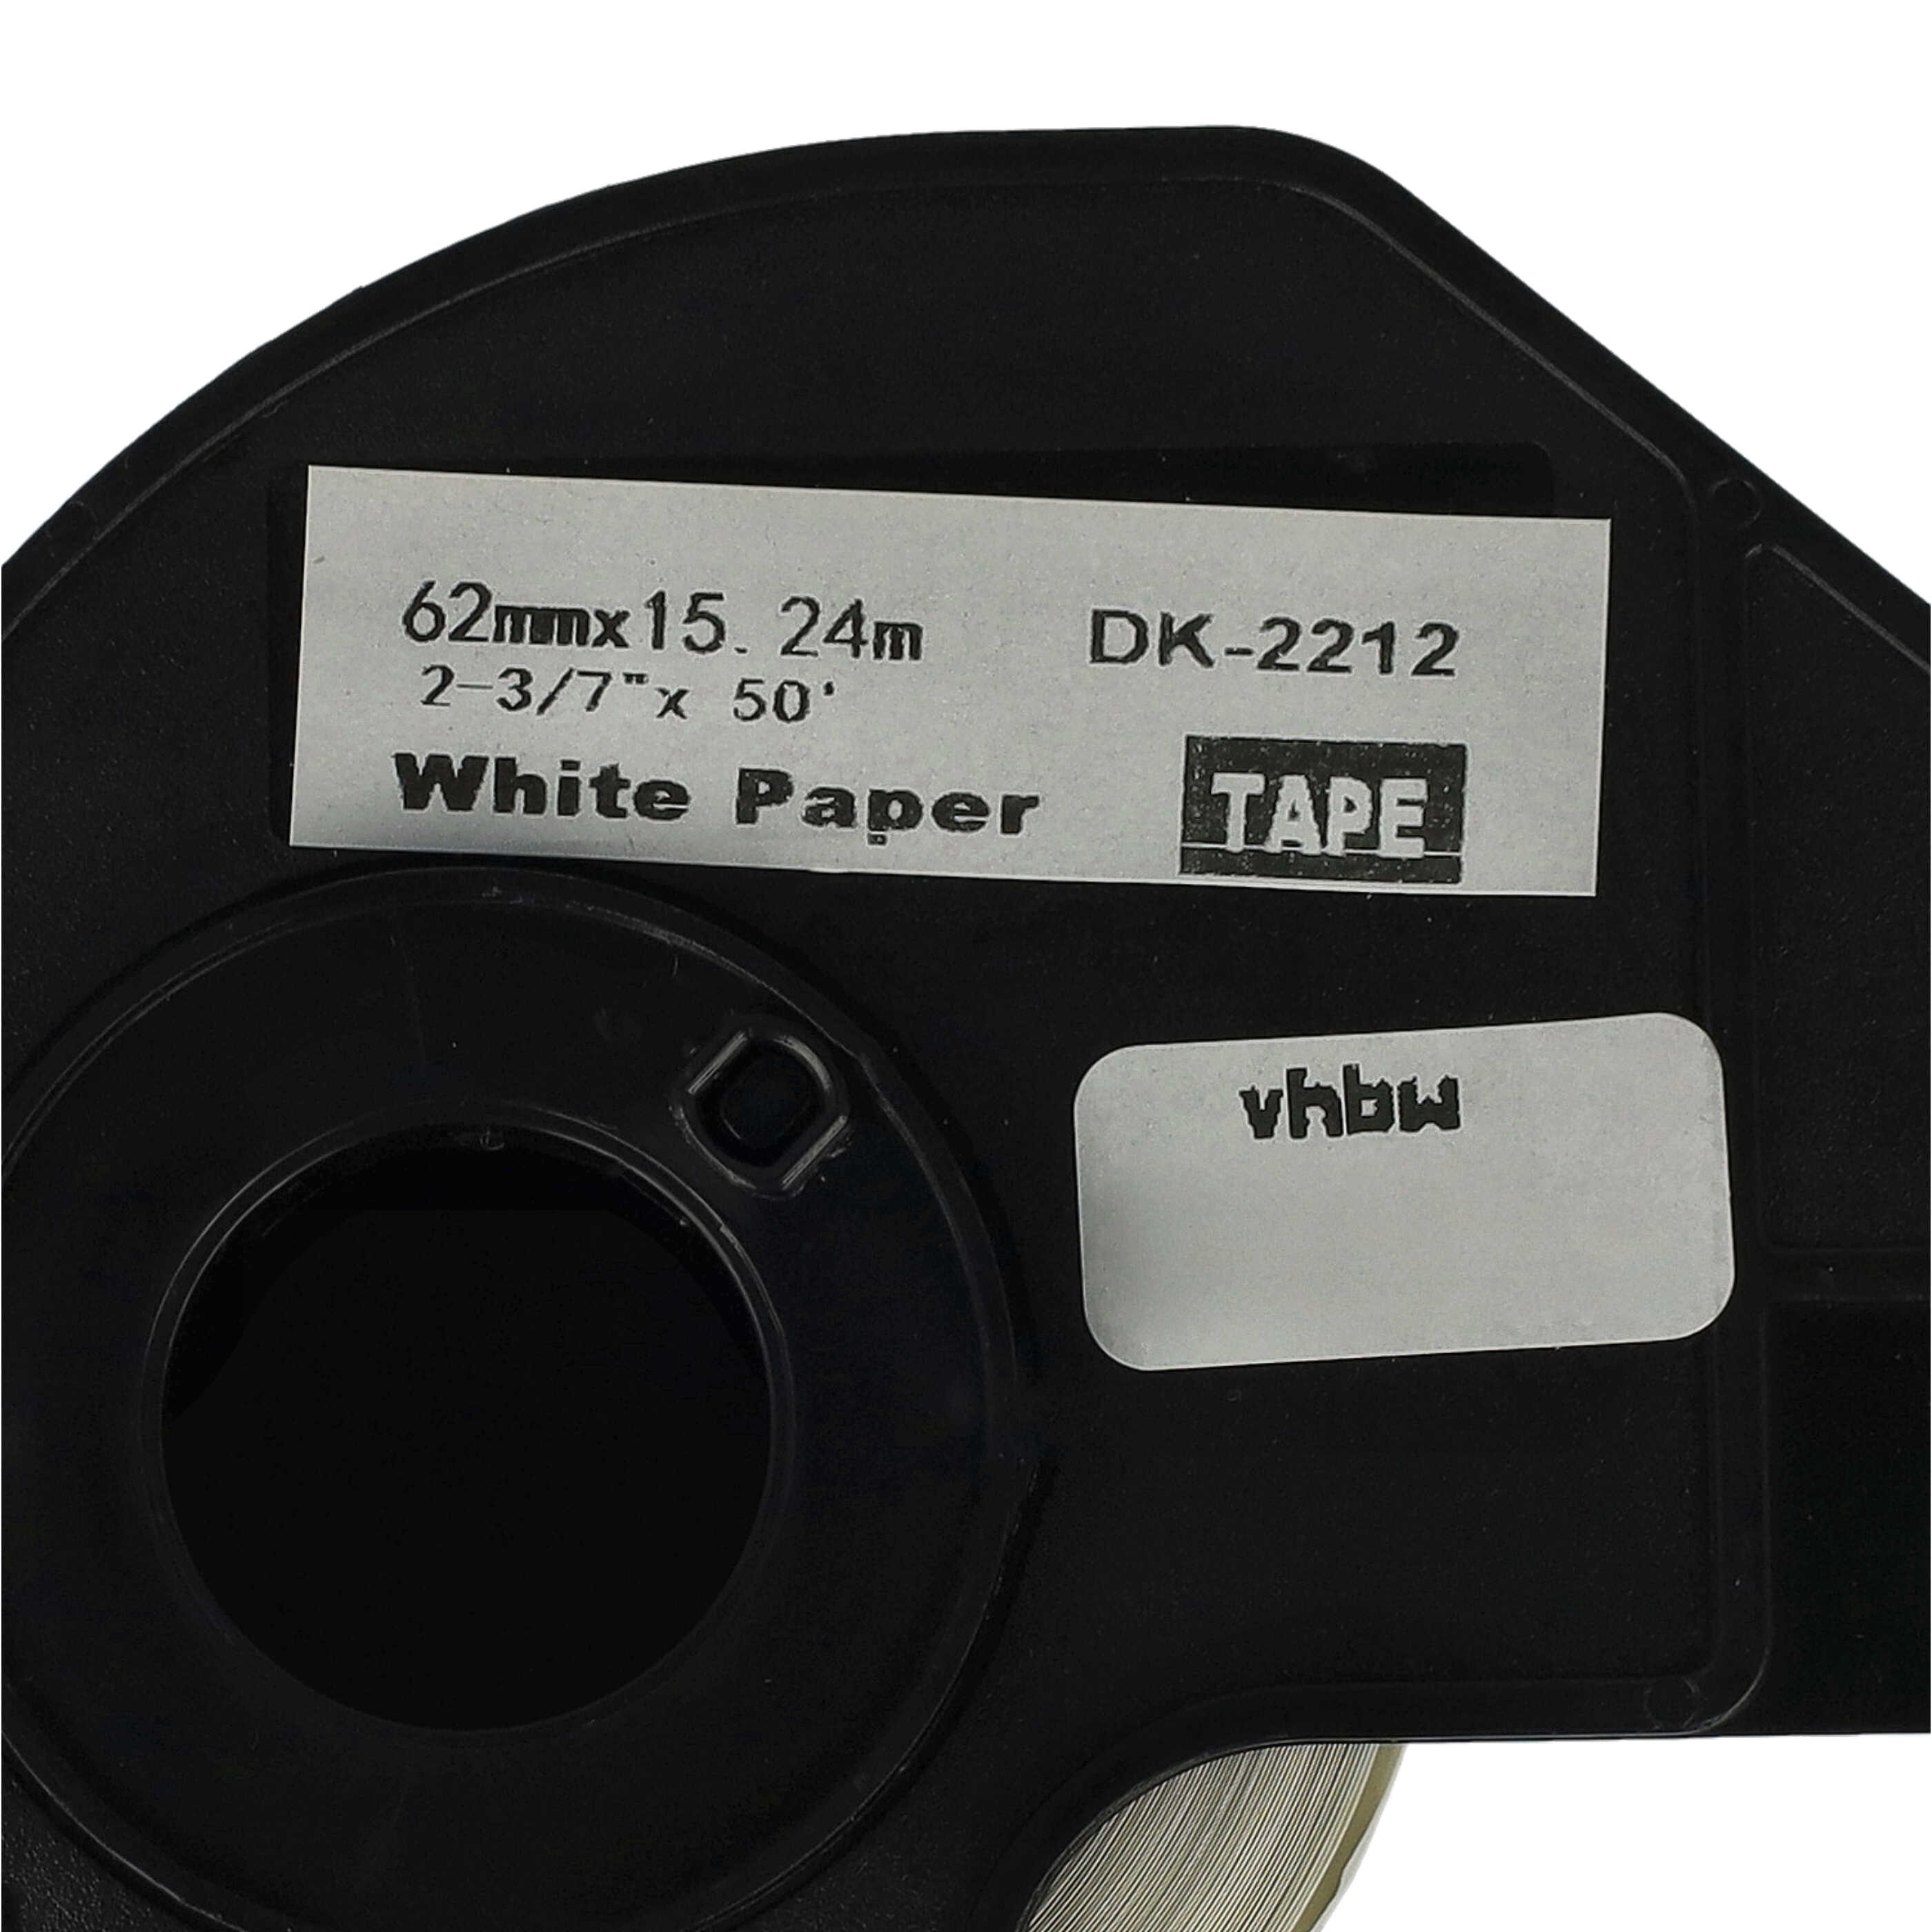 2x Labels replaces Brother DK-22212 for Labeller - 62 mm x 15.24m + Holder